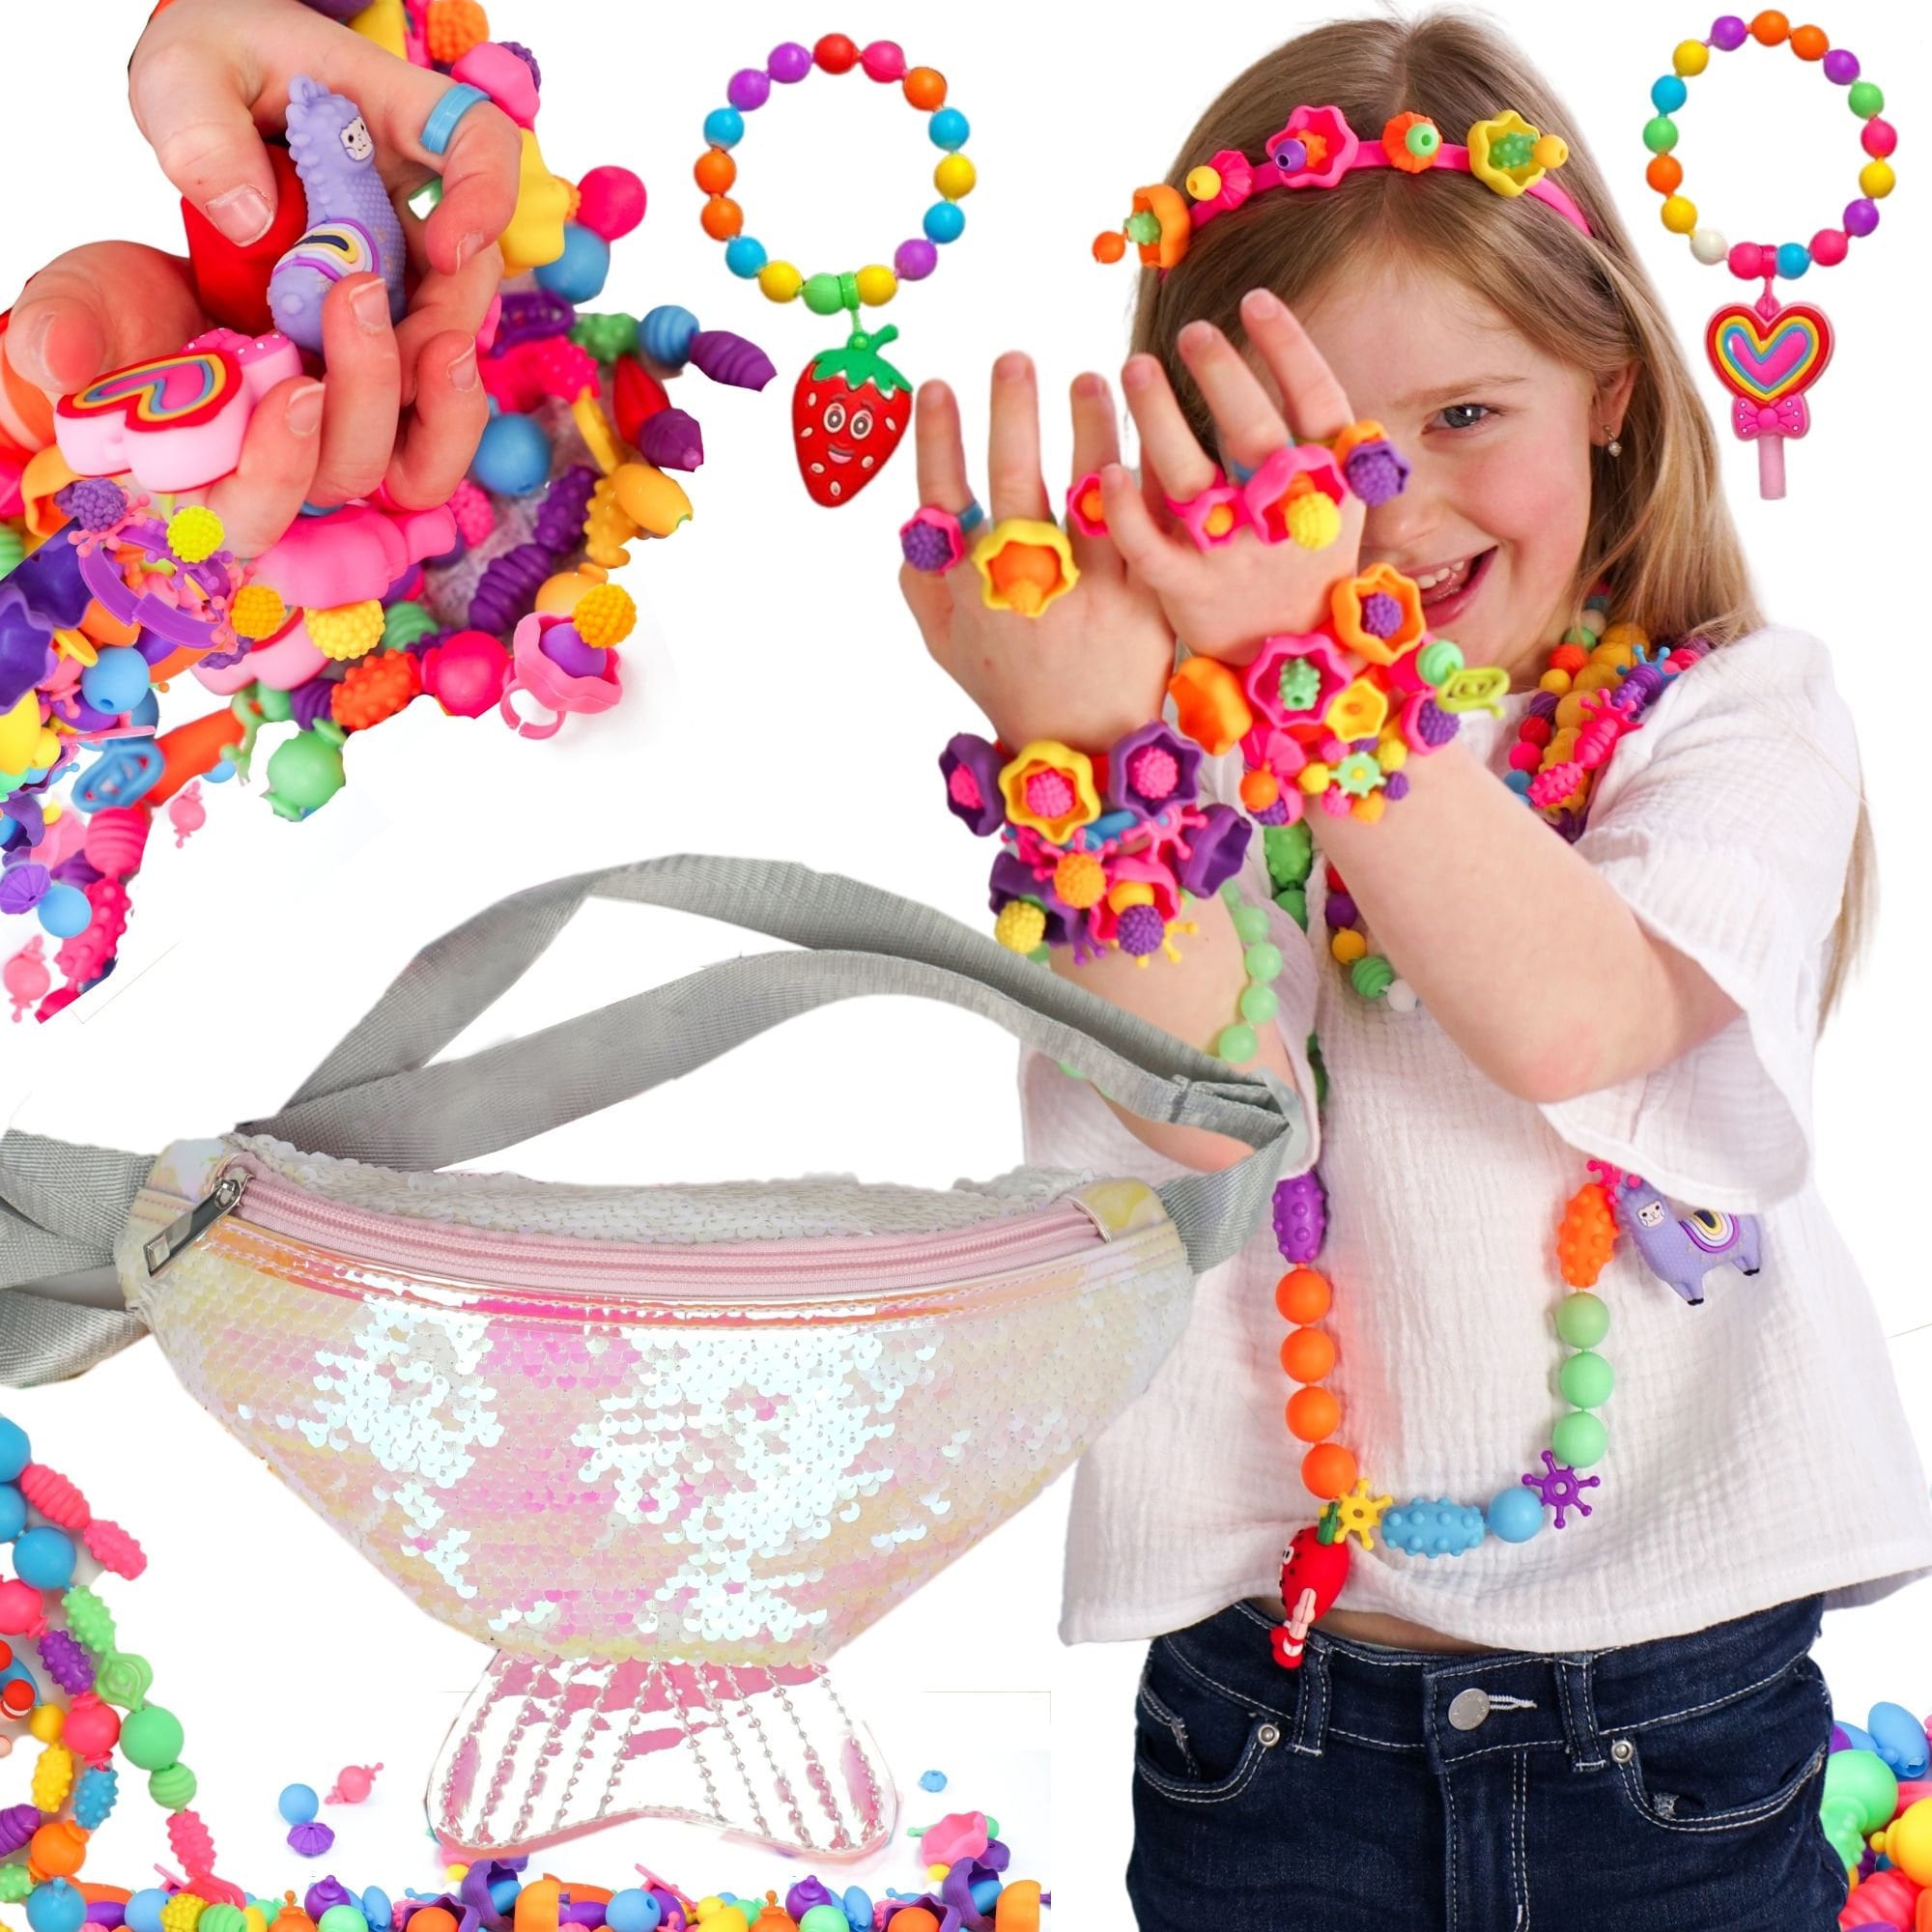 Toy Beads With Mermaid Hip Bag, 4 Year Old Girl Gift, 5 Year Old